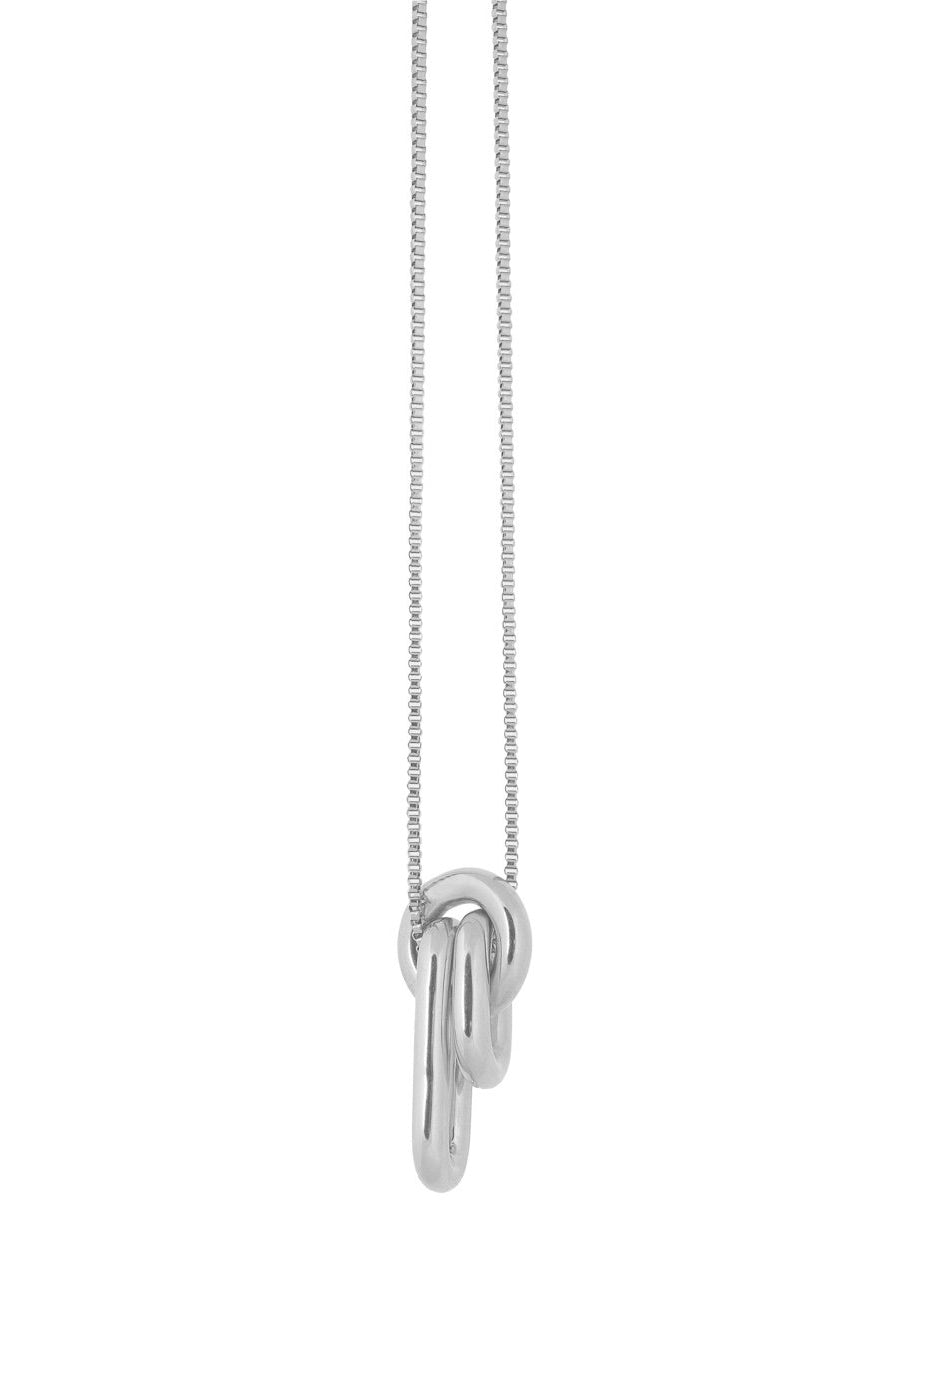 Bandhu Linked Necklace - Silver - RUM Amsterdam